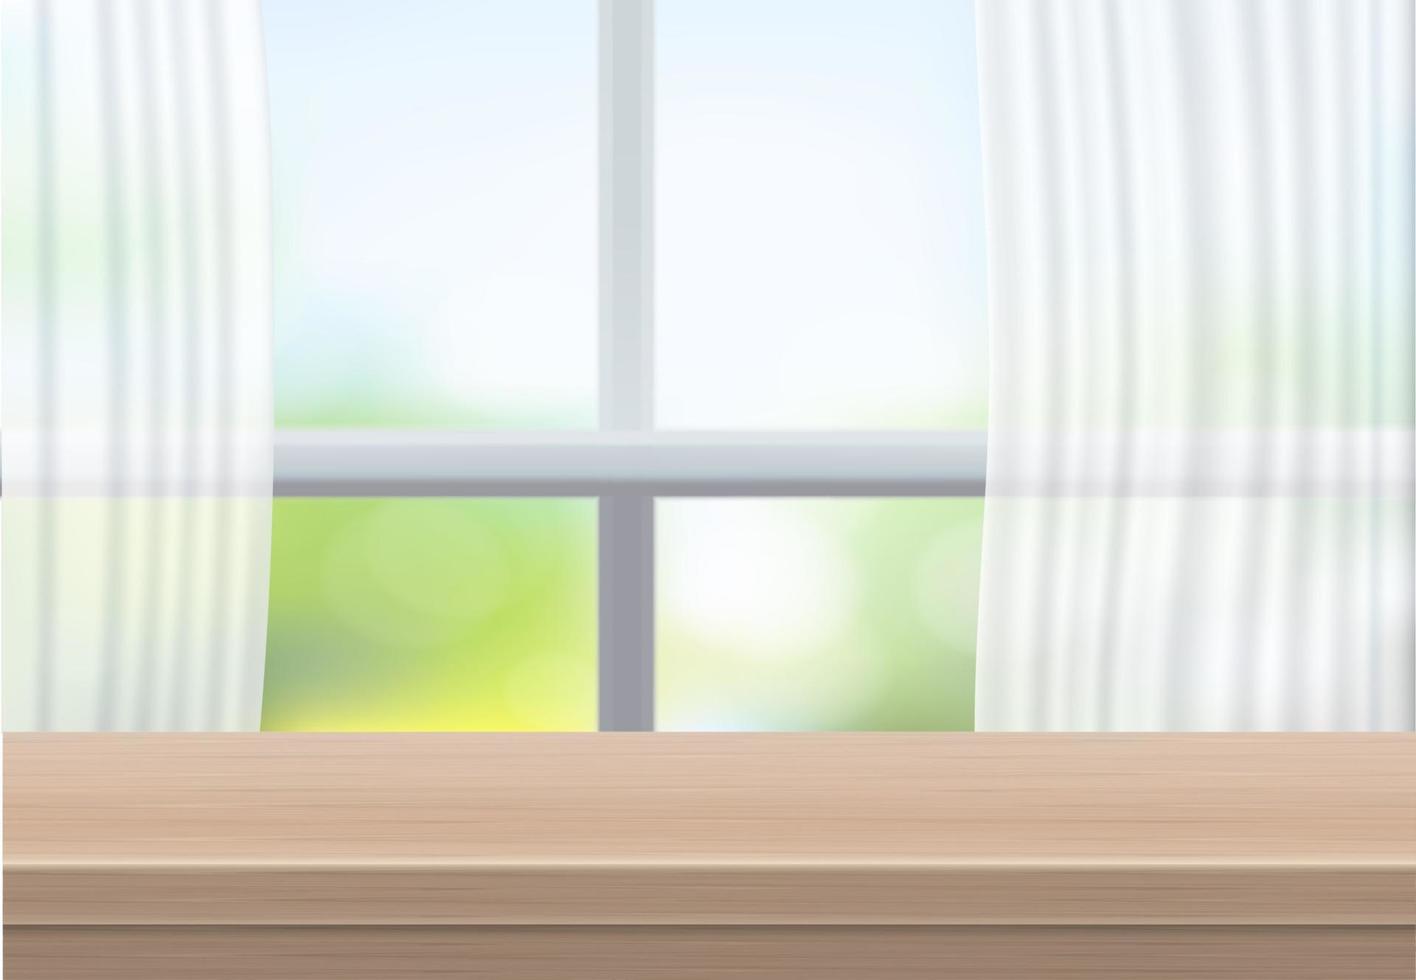 Empty wooden table are front of window glass and curtain. For your copy branding. Used for display or montage products. Modern style wood table white concept. Realistic 3d vector illustration.